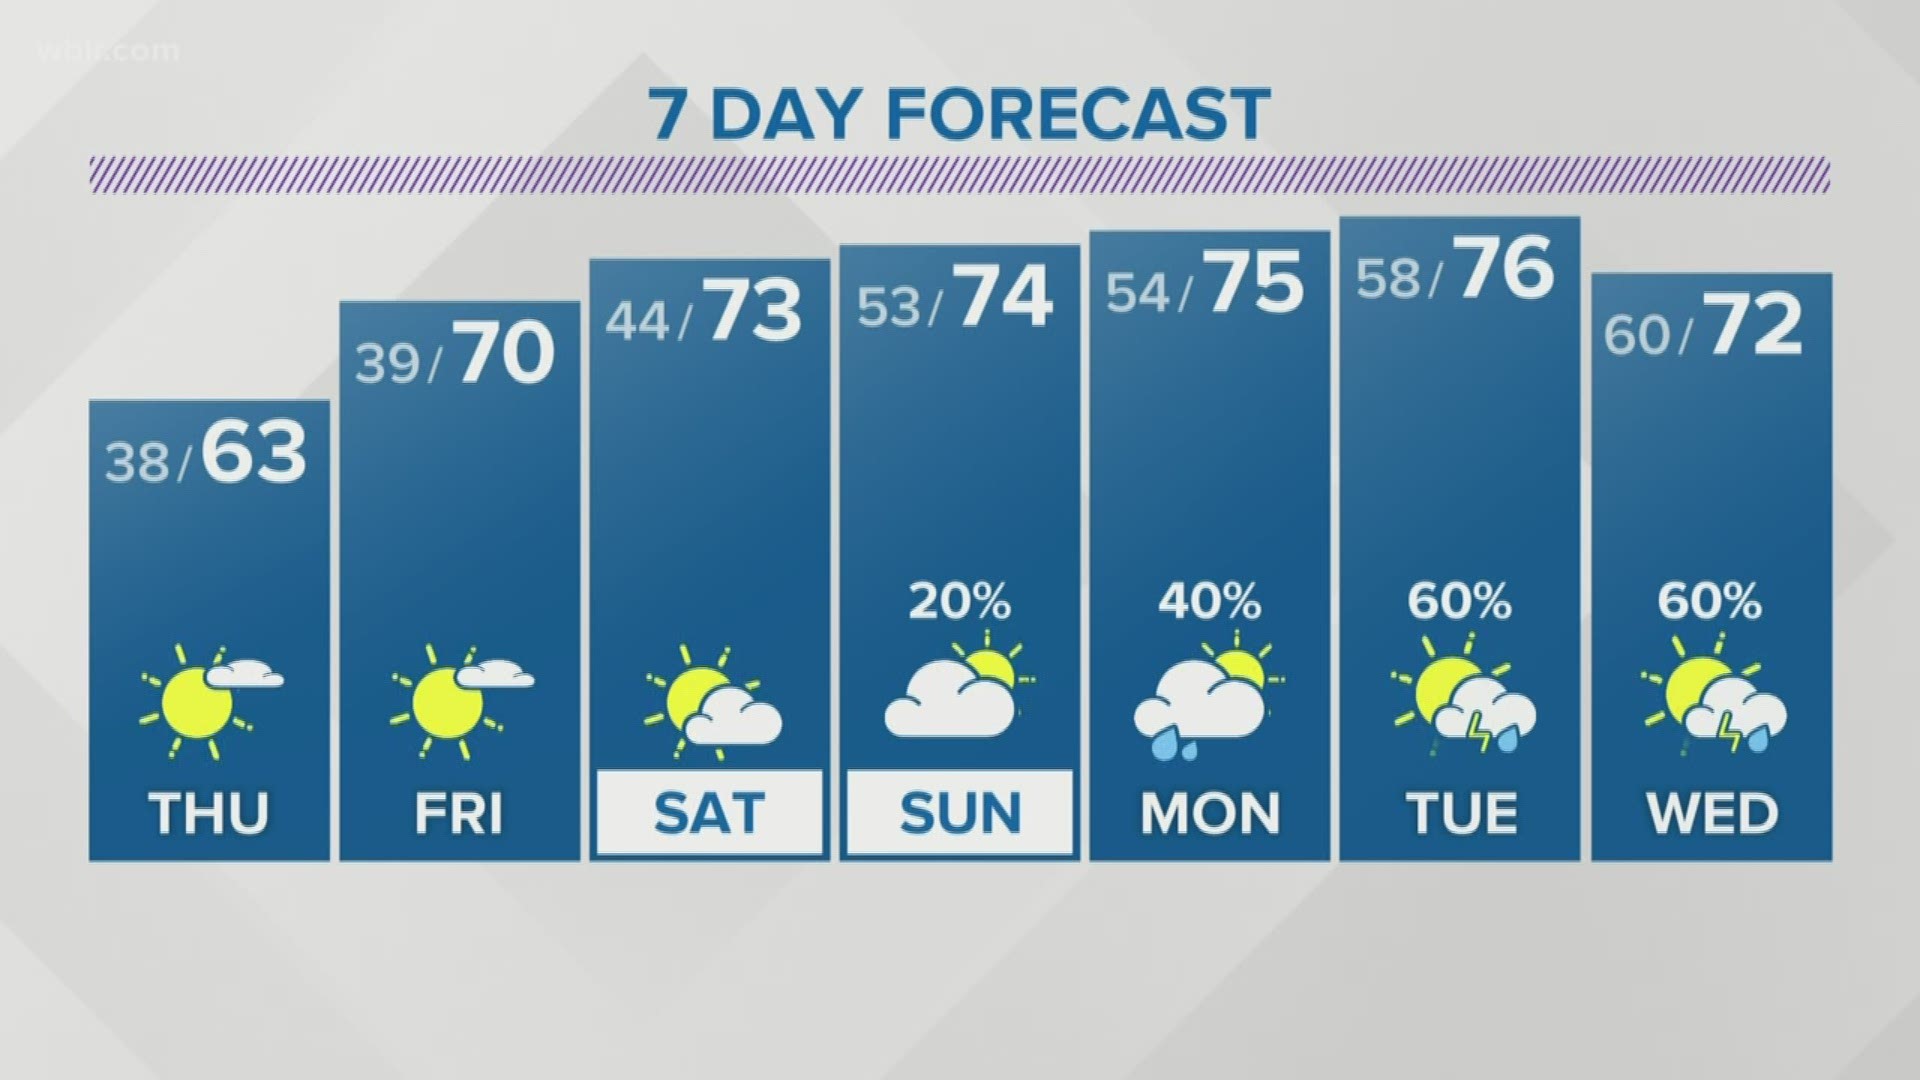 Gradual warming trend brings highs back into the 70s by this weekend.